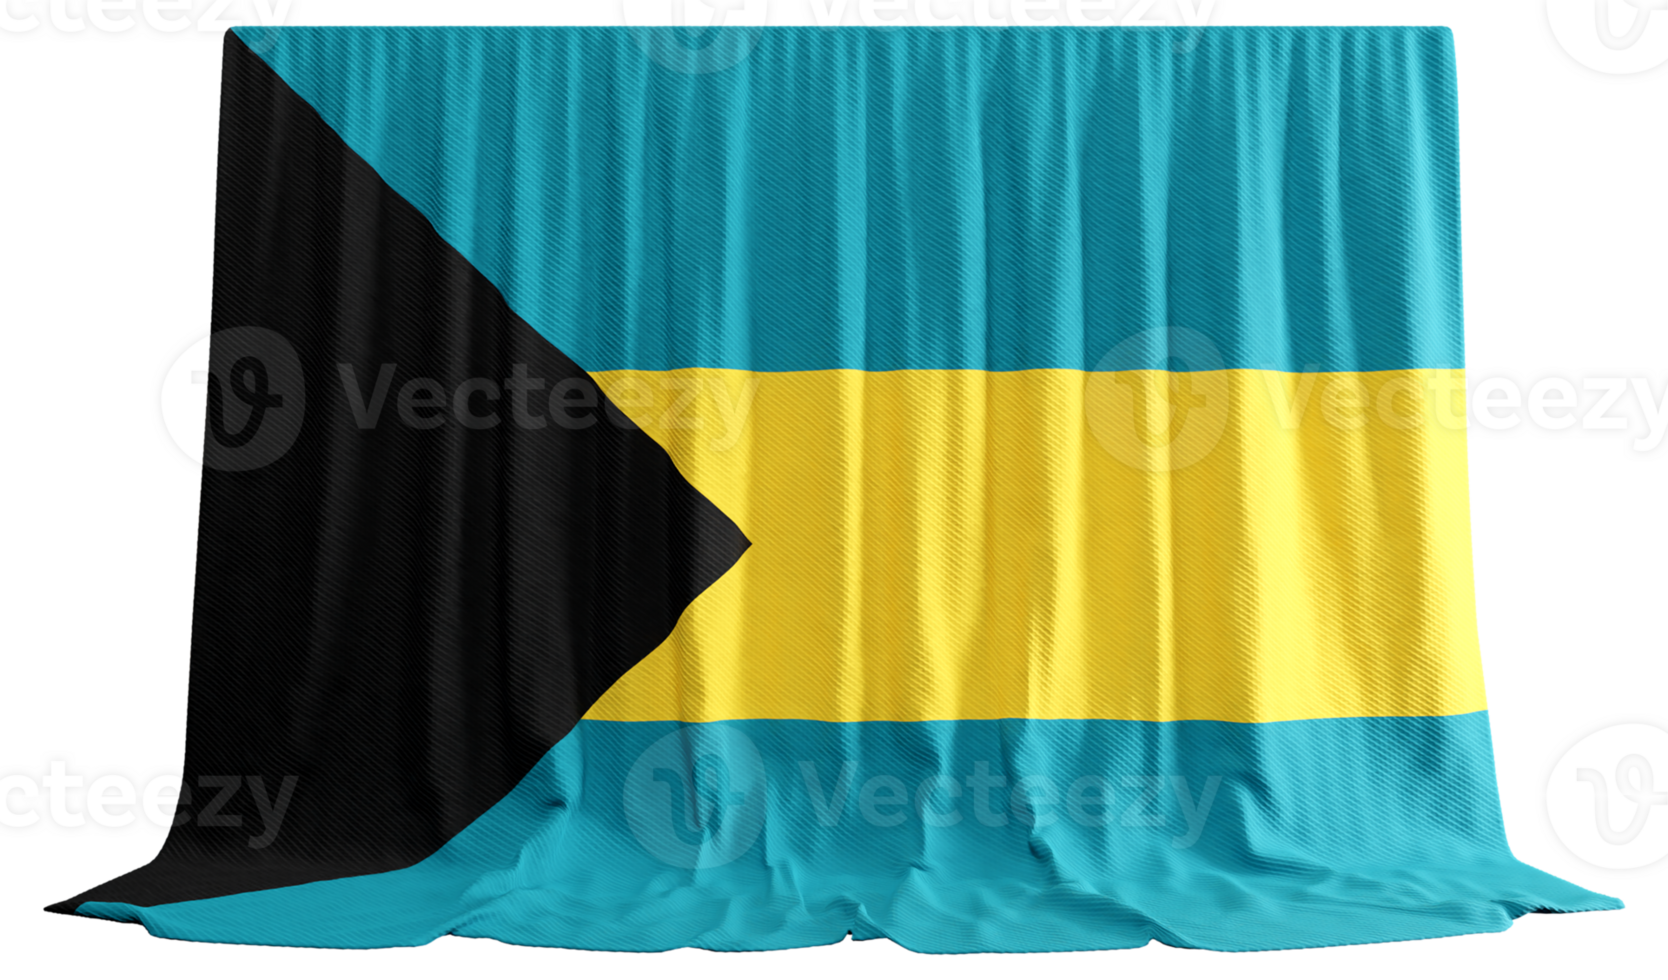 Bahamian flag waves proudly 3D rendered symbol of culture and sport Conferences unite echoing history's pride png